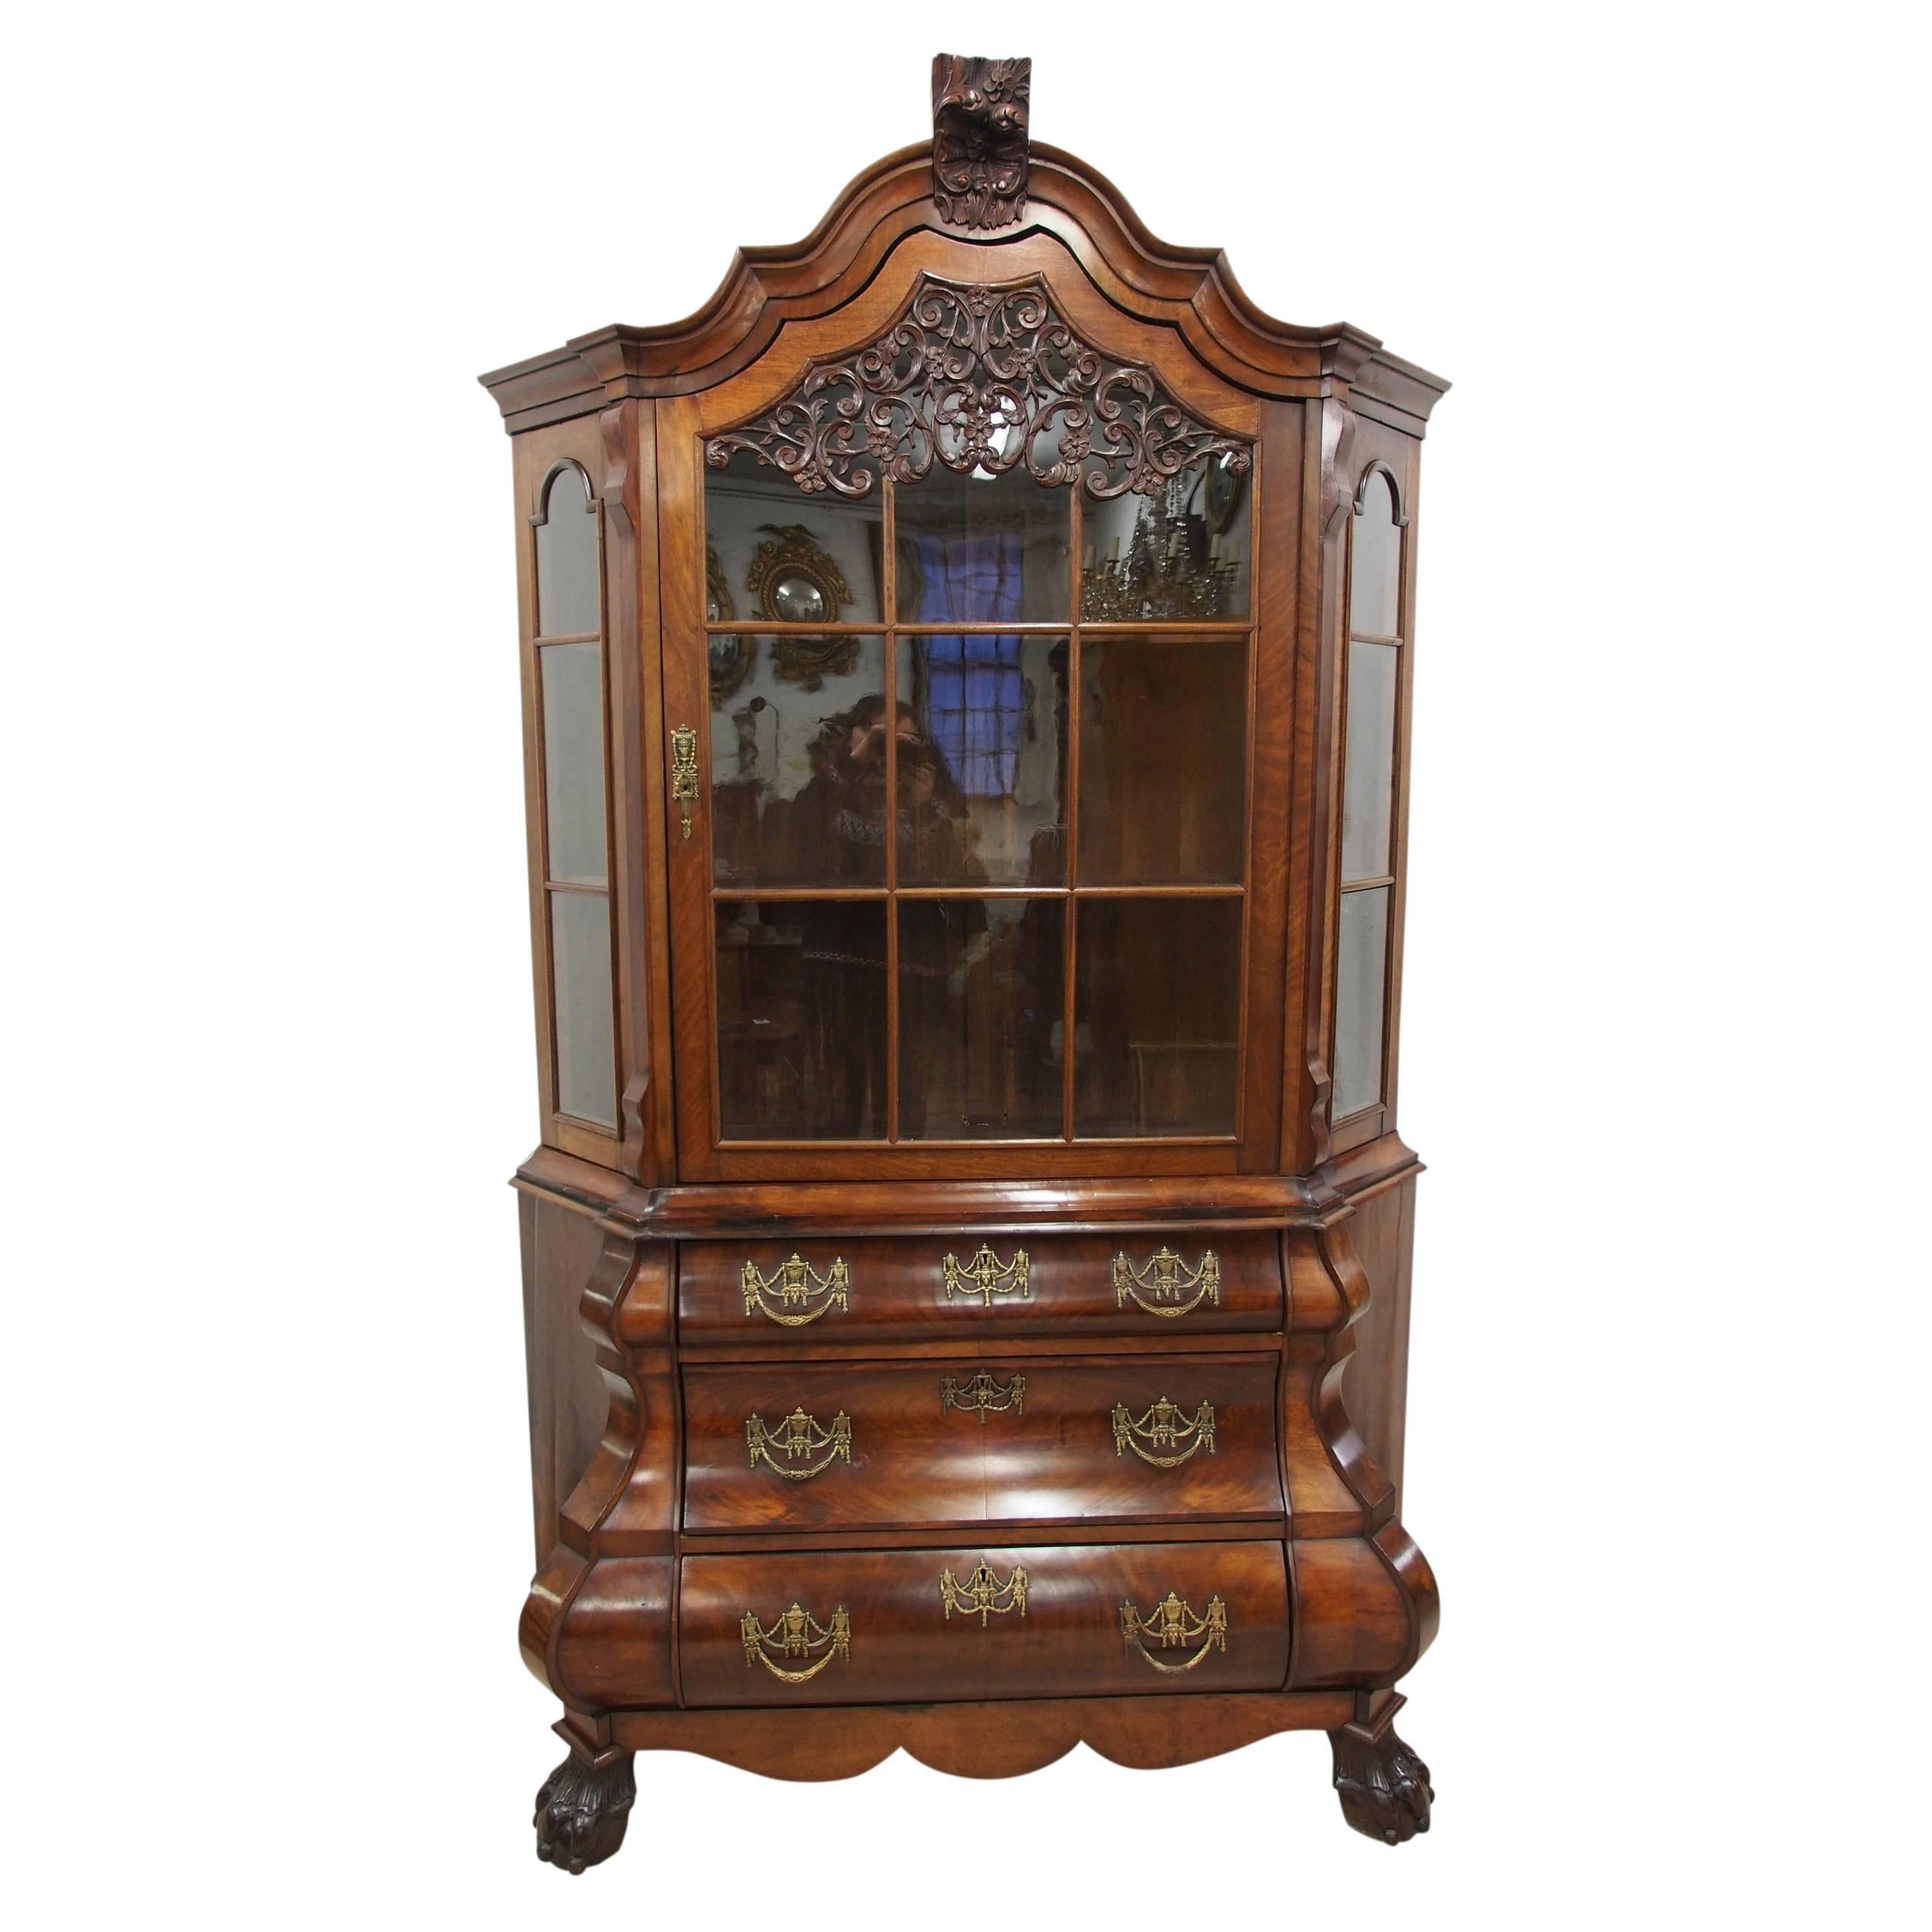 Dutch figured walnut bombe-front bookcase, circa 1860. With a square astragal glazed door in the further astragal glazed windows to the sides. The door has a foliate pierced carved decoration and a shaped arched cornice above with further foliate